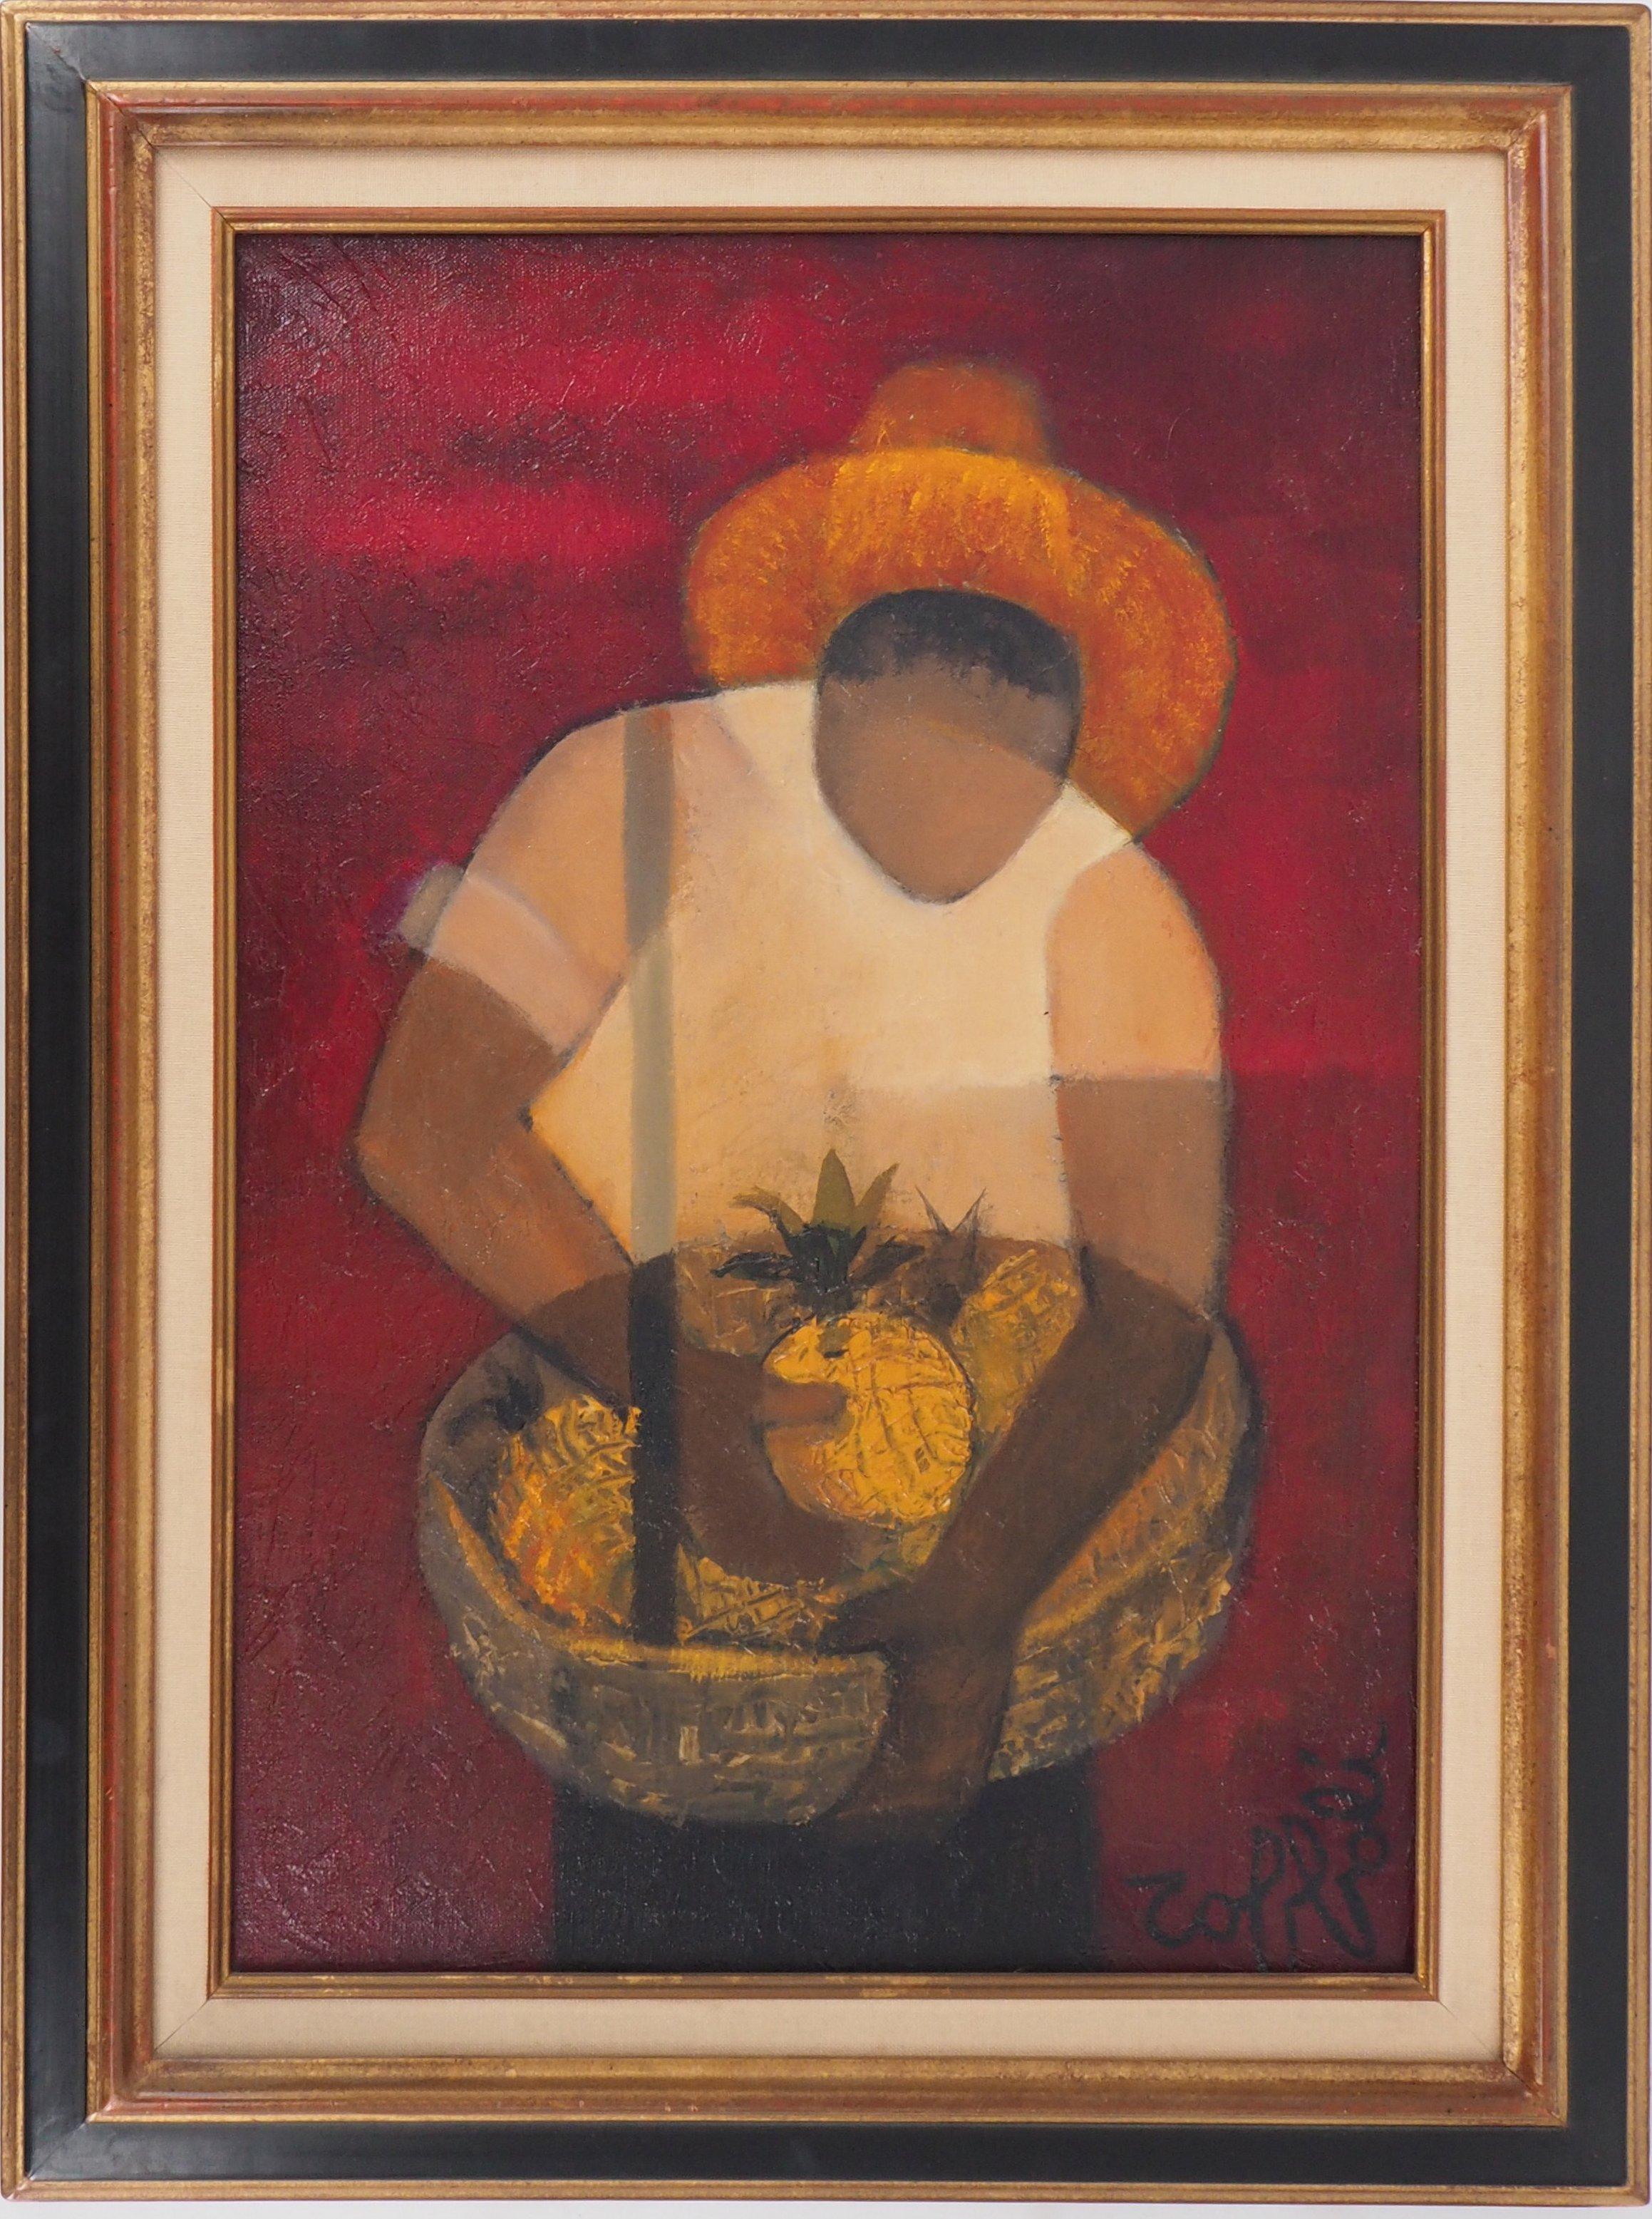 Louis Toffoli Figurative Painting - Brasil : Man with Pineapple - Original oil  on canvas painting - Signed